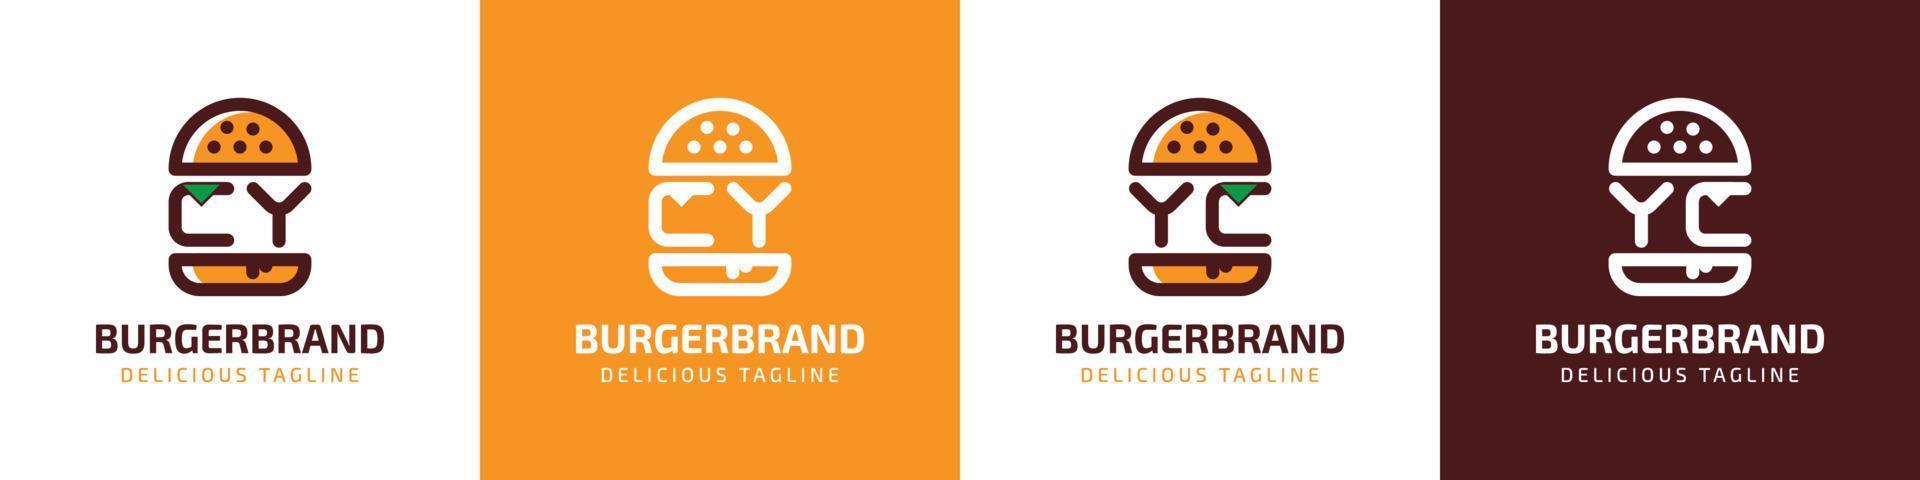 Letter CY and YC Burger Logo, suitable for any business related to burger with CY or YC initials. vector